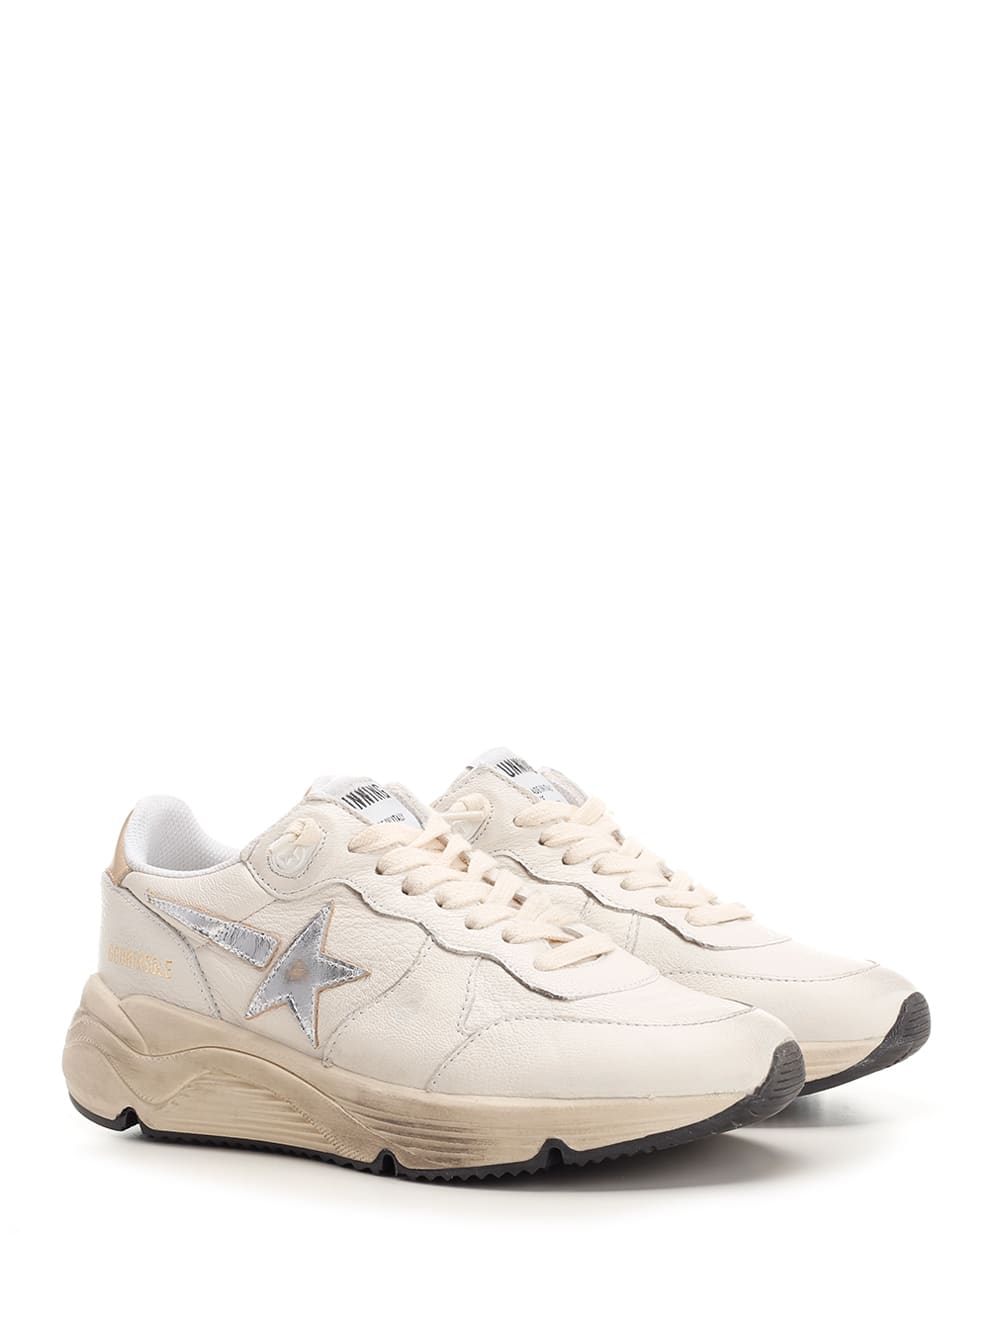 Shop Golden Goose Ivory Running Sole Sneakers In White/silver/gold